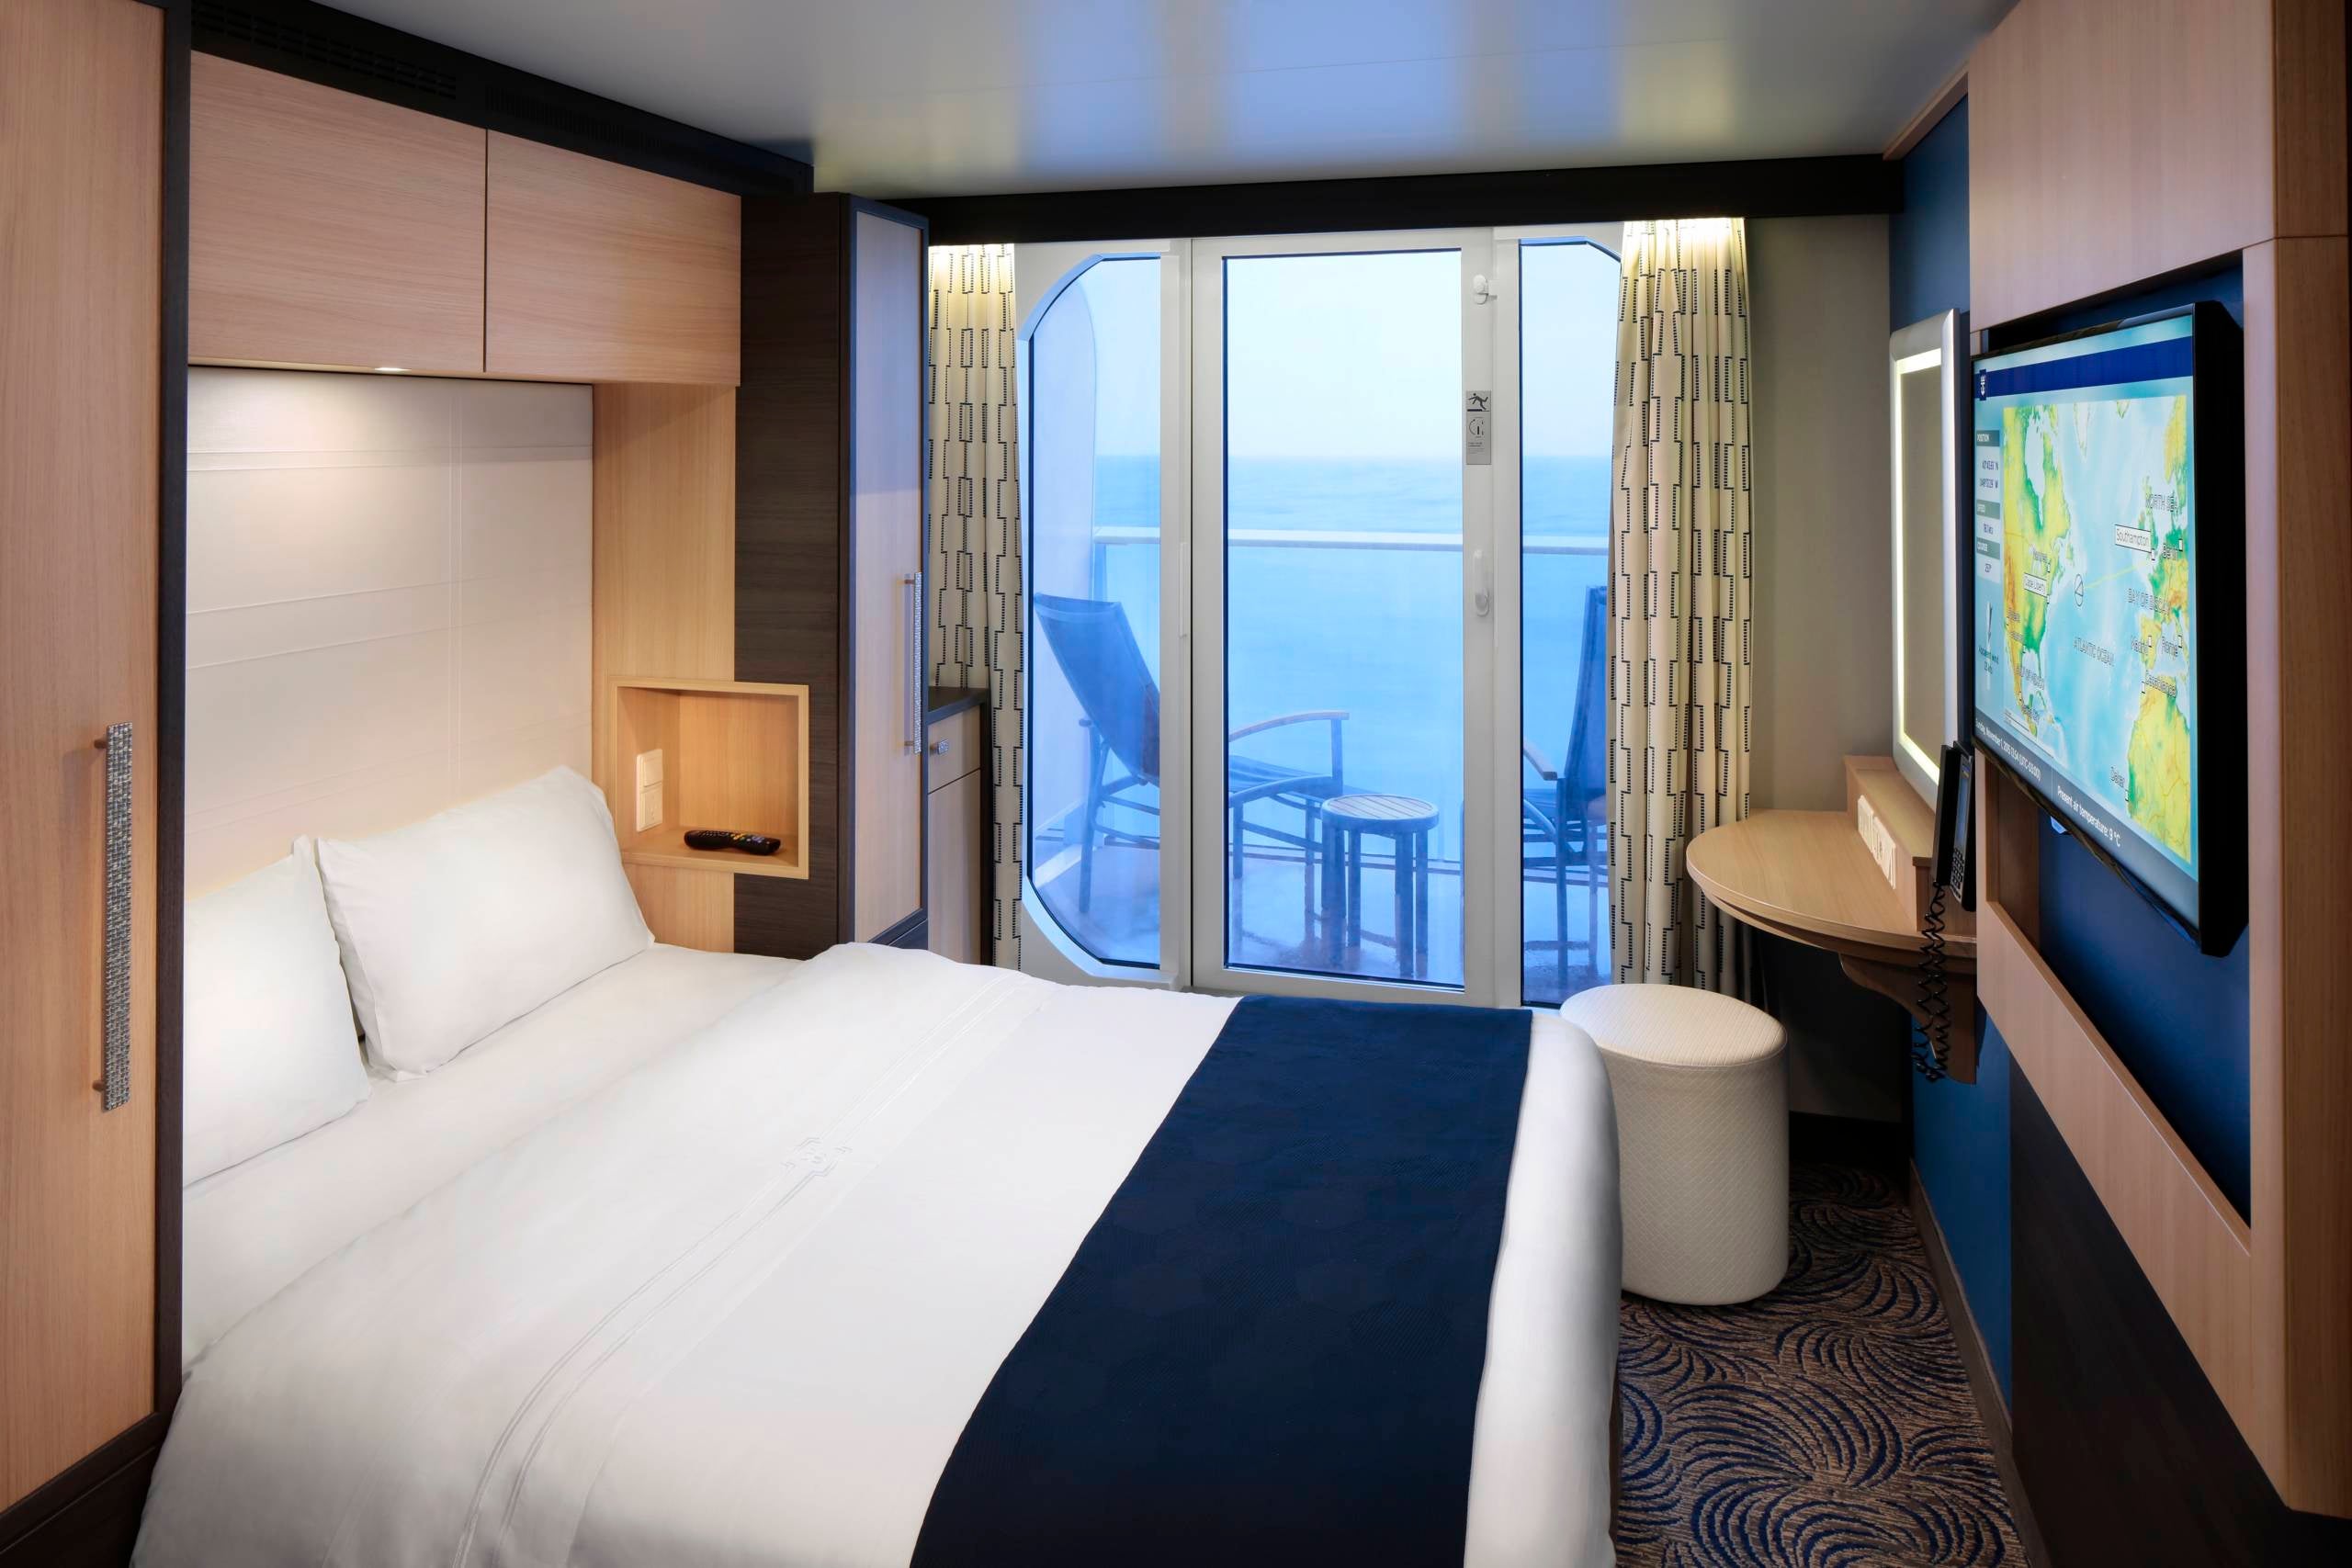 Royal Caribbean offers "studio" cabins for one on some ships that come with an ocean view. Photo courtesy of Royal Caribbean.